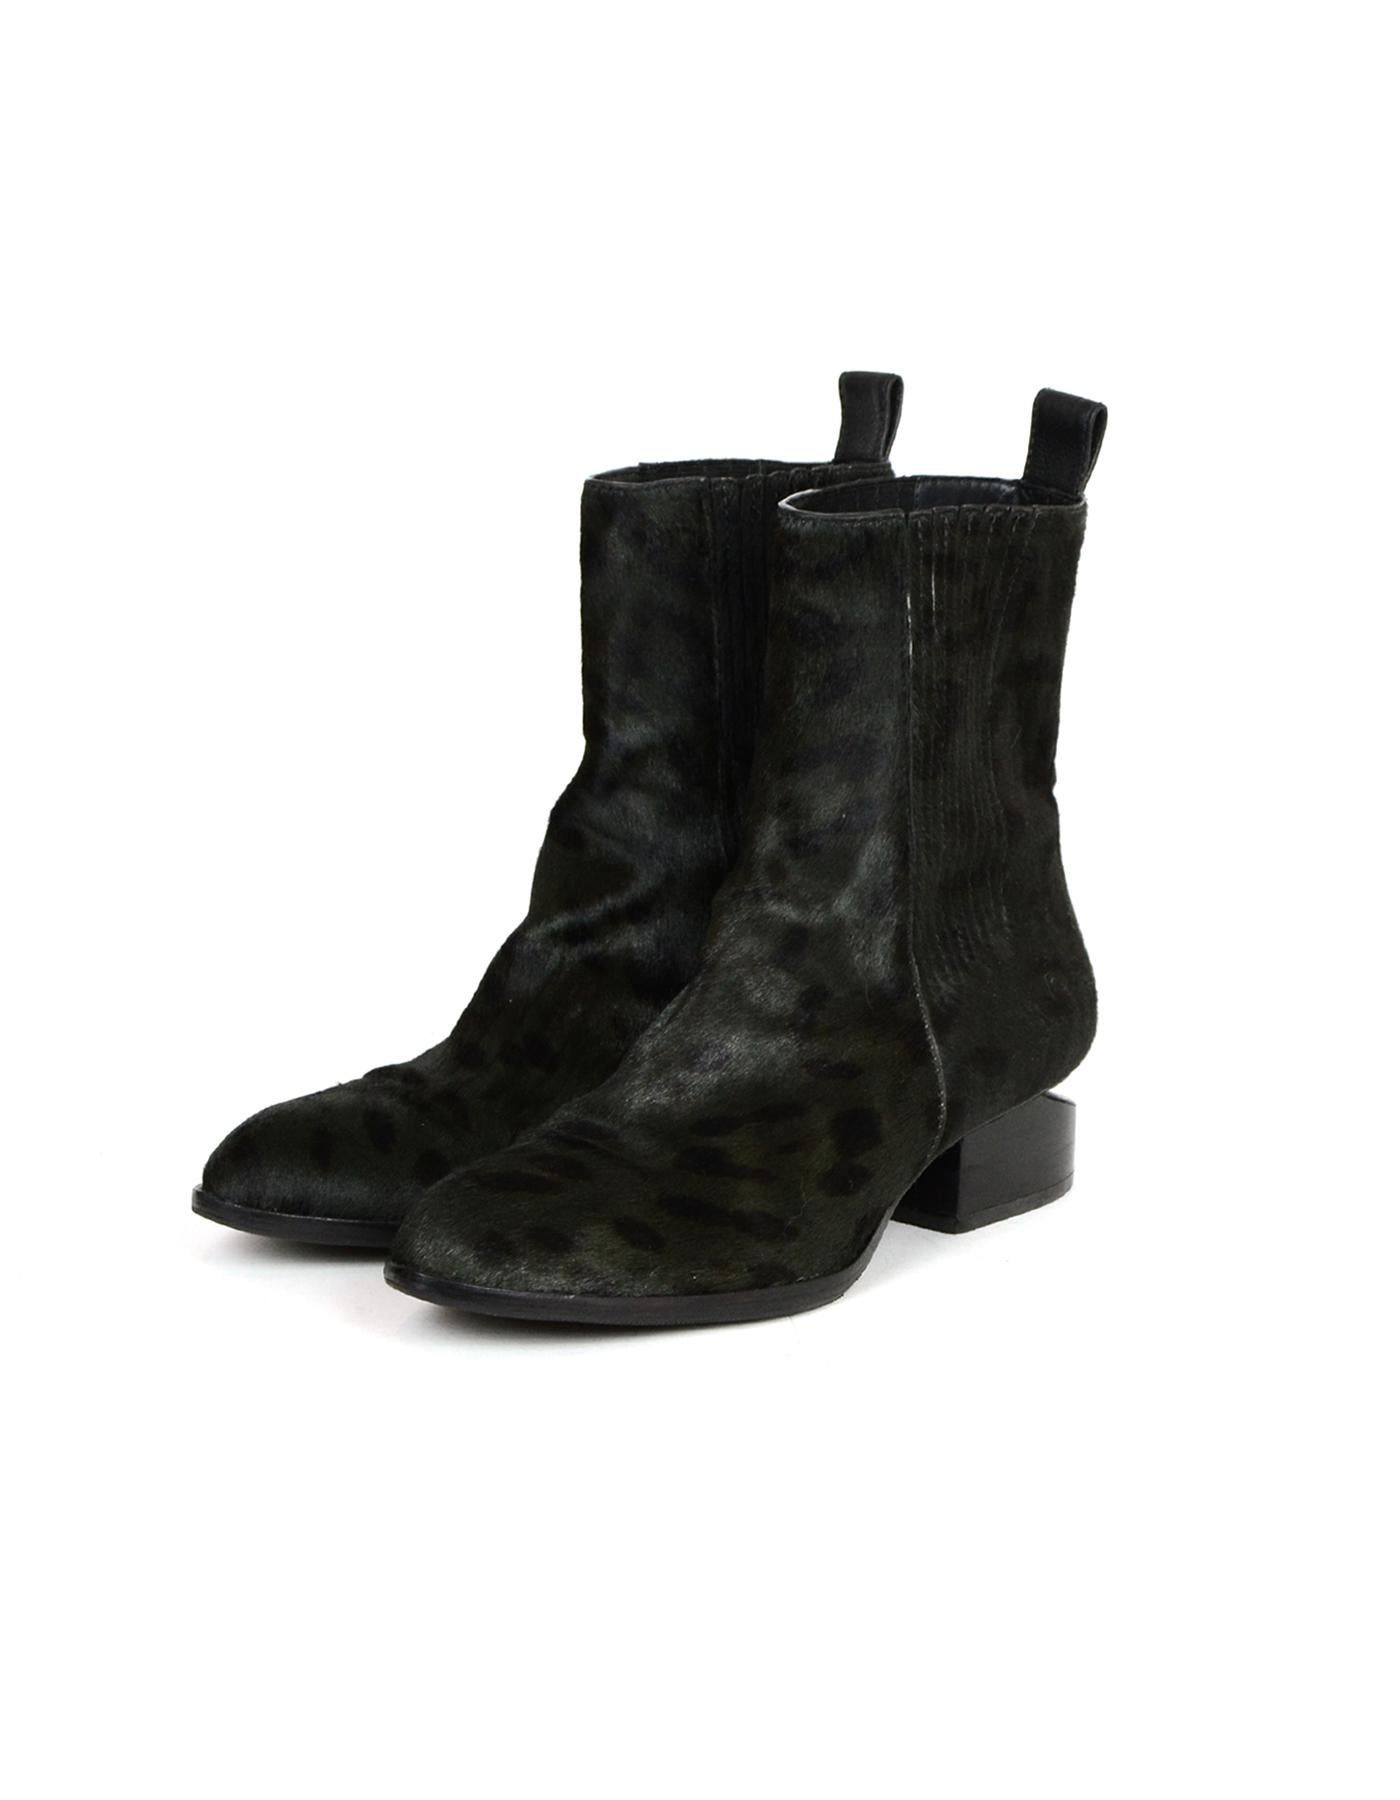 Alexander Wang Black Calf Hair Anouck Shortboots sz 41

Color: Black
Materials: Calf hair, leather
Closure/Opening: Slip on
Overall Condition: Excellent pre-owned condition, with the exception of slight wear on heels and scuffs on insoles. 

Marked